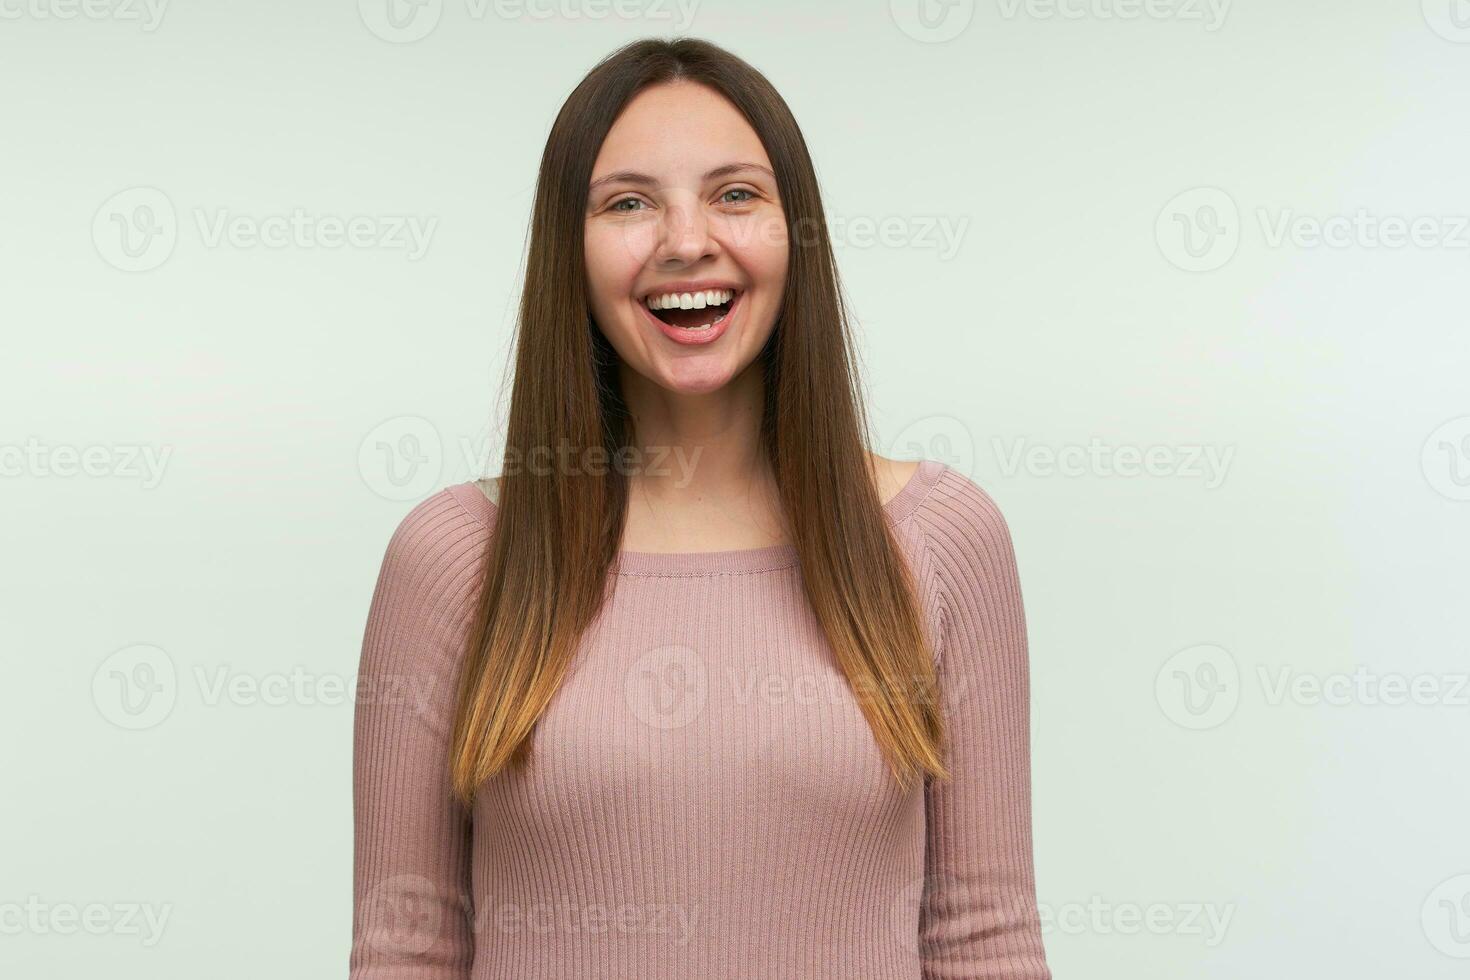 Portrait of young woman with long hair down, looks glad, laughing on a joke, smiling, dressed in a tight pink knit sweater, isolated over white background photo